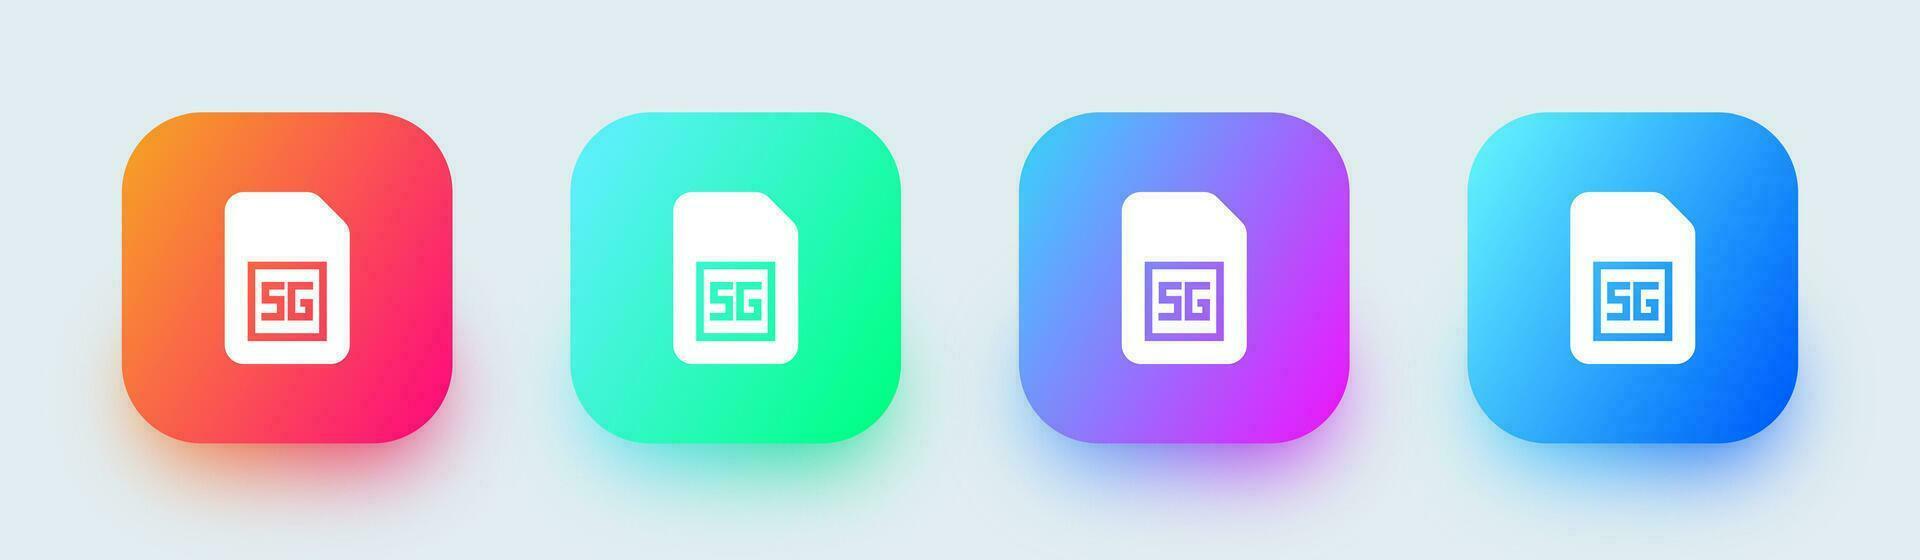 5 generation solid icon in square gradient colors. Network signs vector illustration.